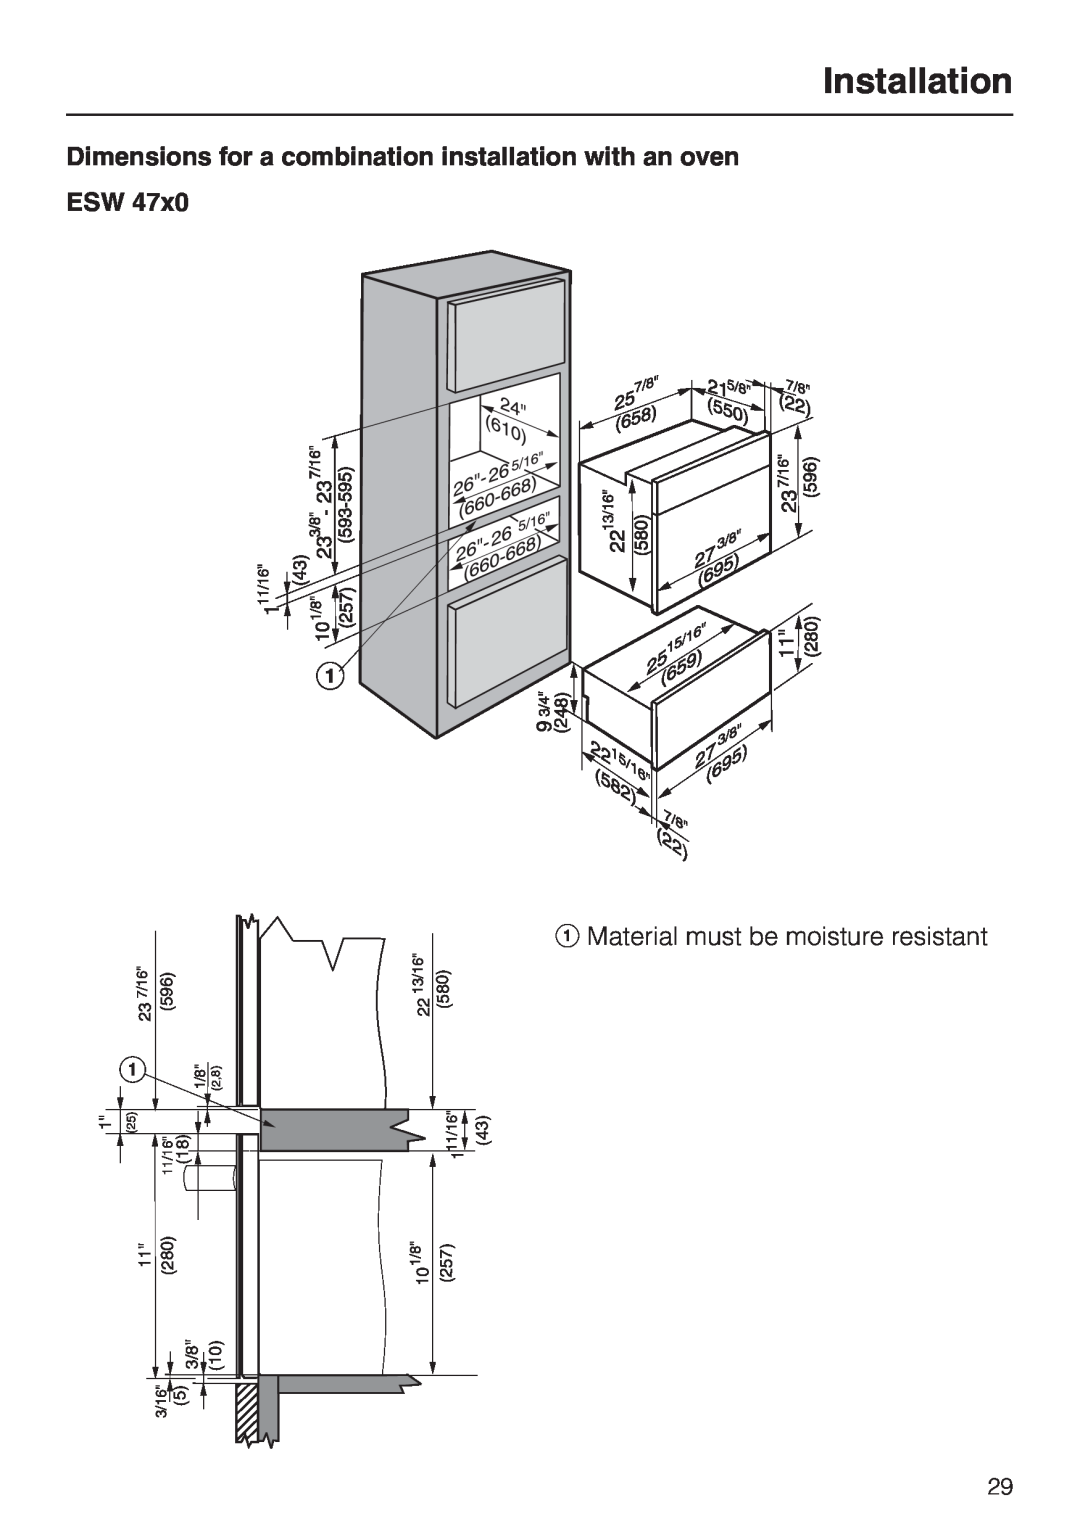 Miele ESW 47XX Dimensions for a combination installation with an oven ESW, Installation, 11/16, 7/16, 13/16 